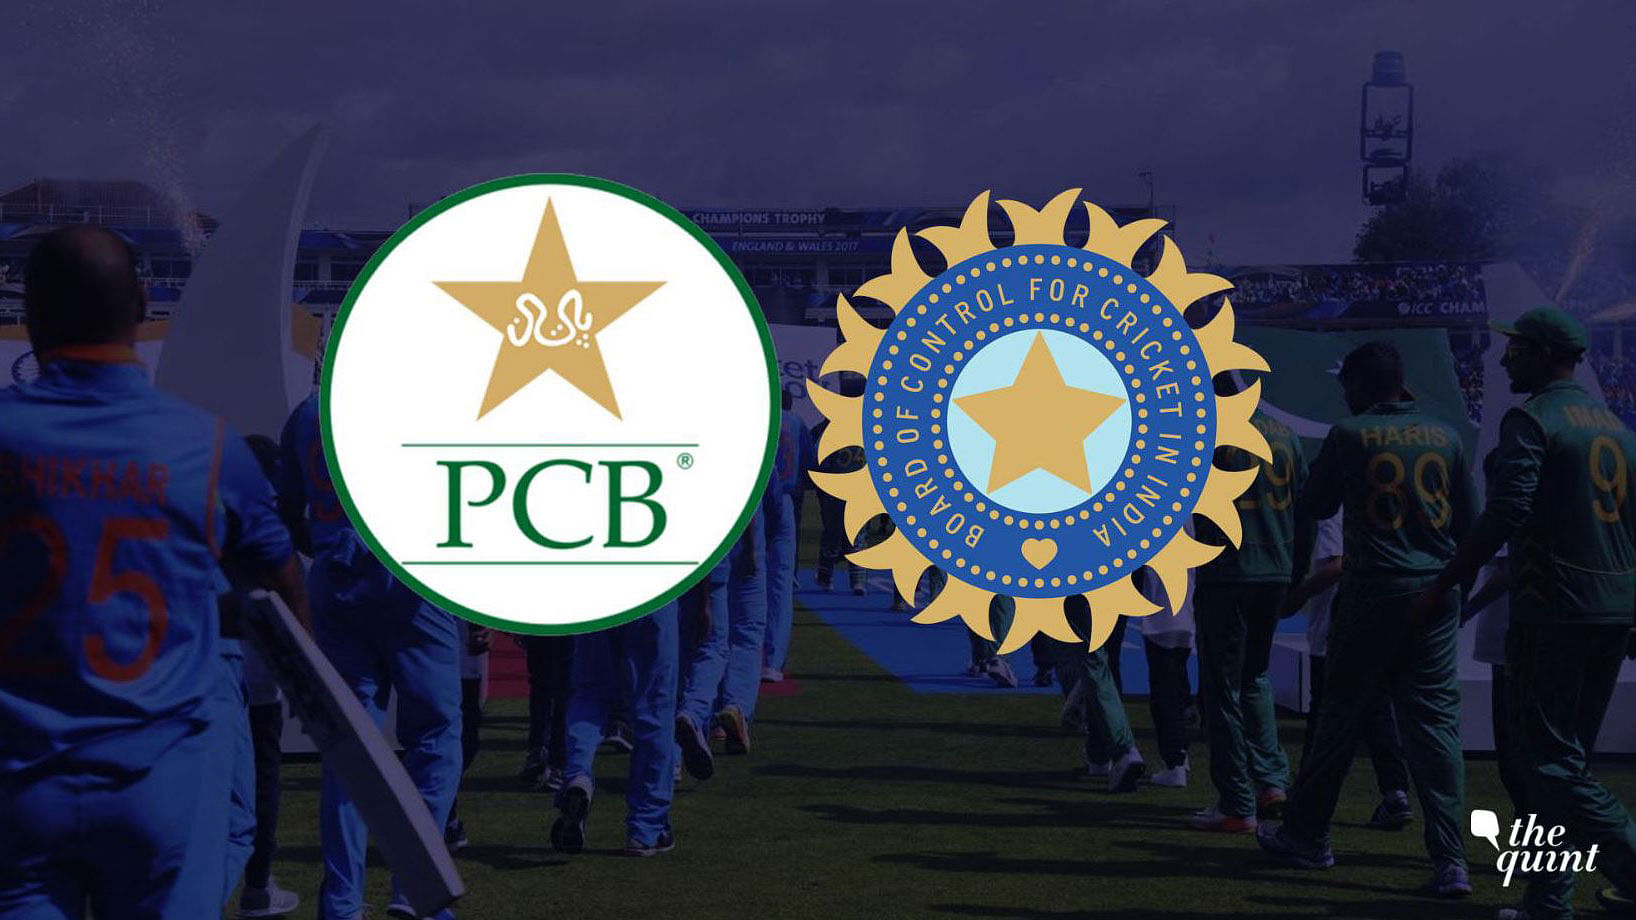 A BCCI official told PTI that the board cannot possibly get Pakistan ousted from the 2019 ICC World Cup.